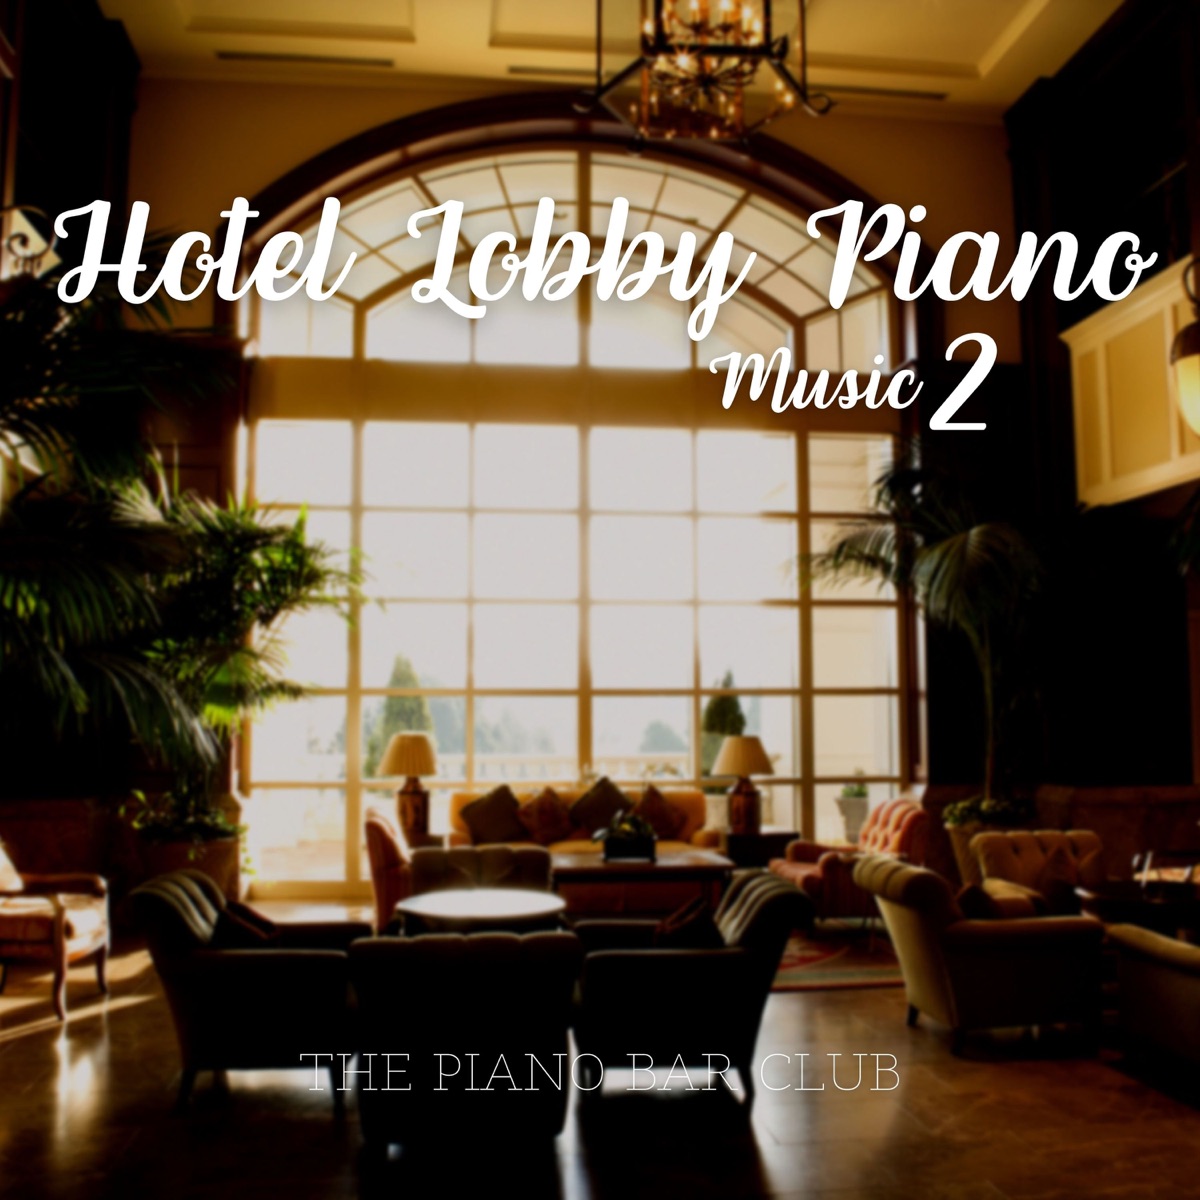 Hotel Lobby Piano Music 2 by The Piano Bar Club on Apple Music